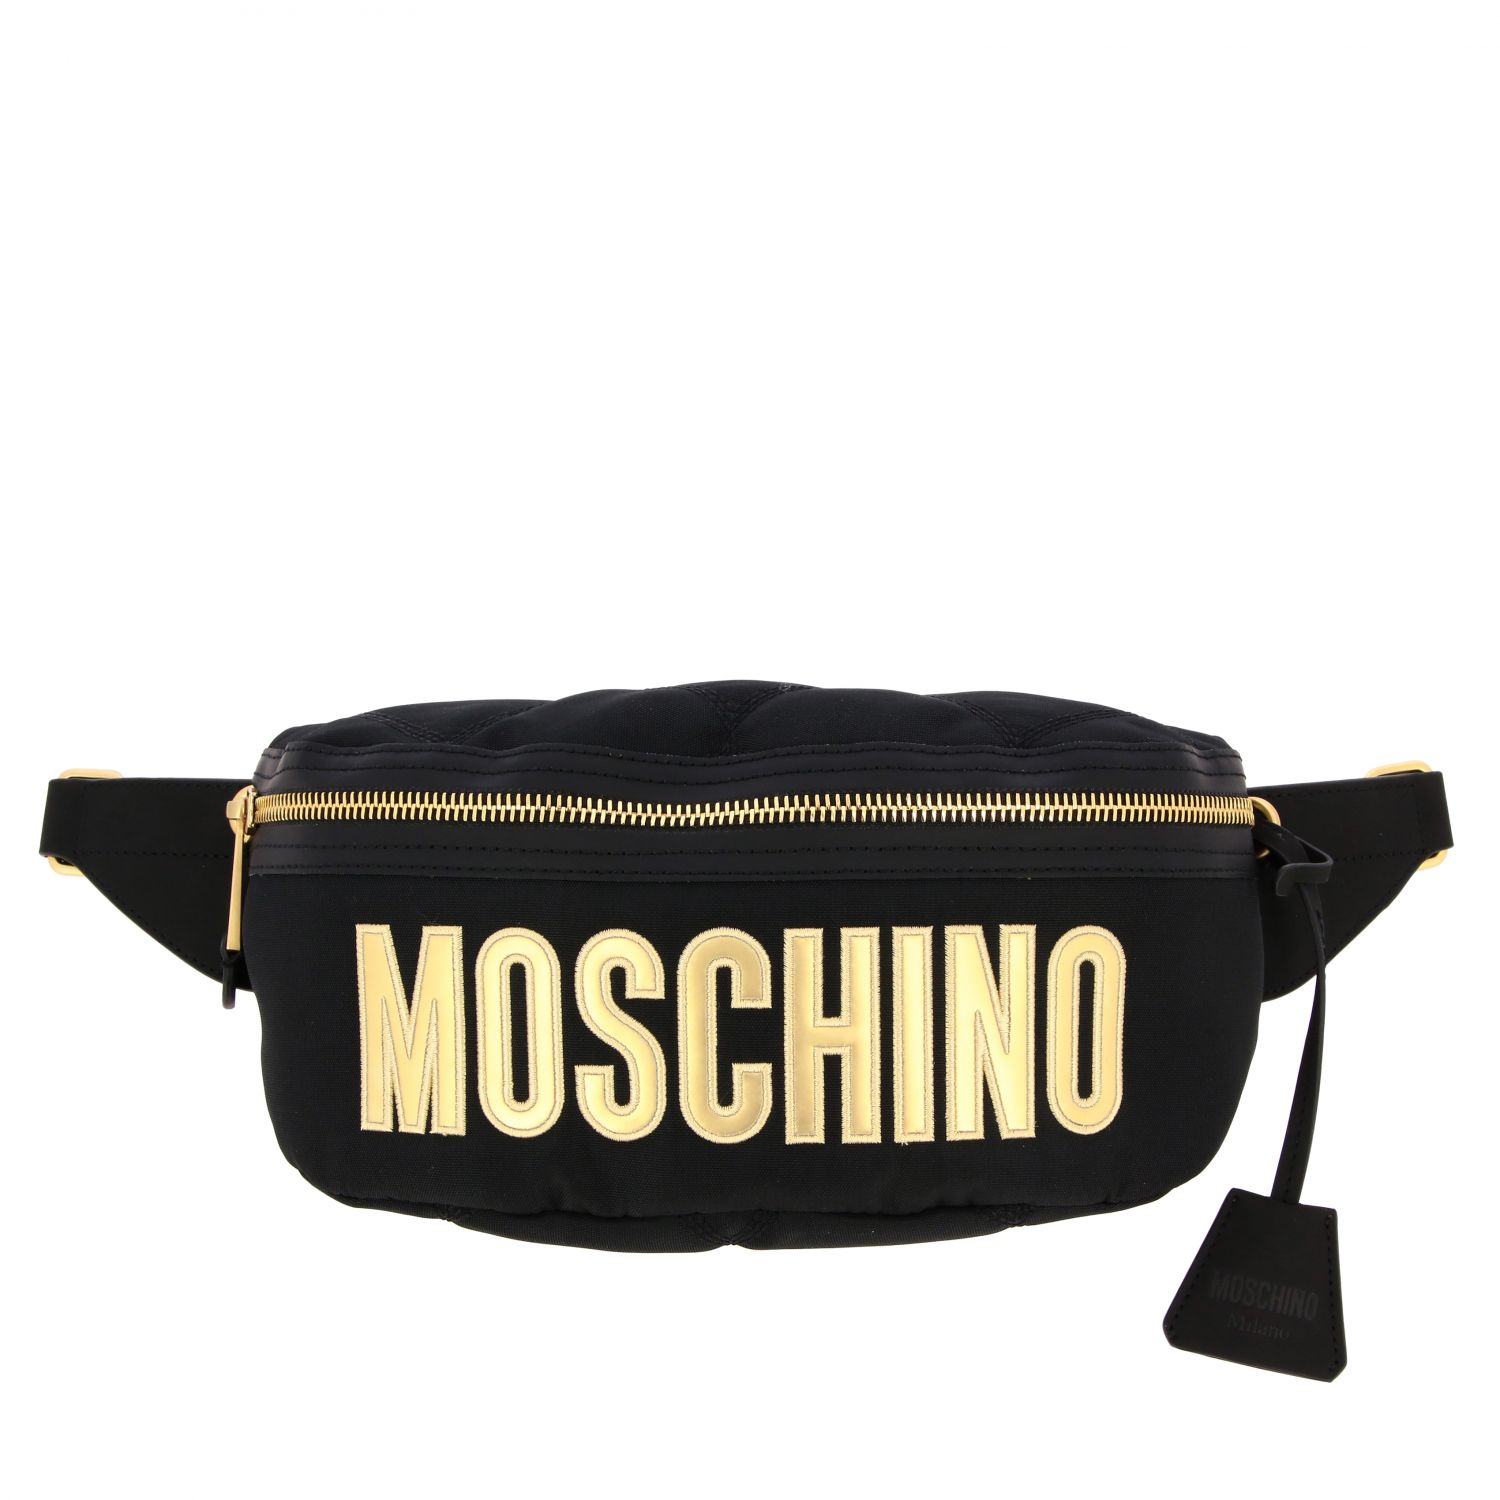 Moschino Couture Outlet: pouch in quilted nylon with big logo - Black ...